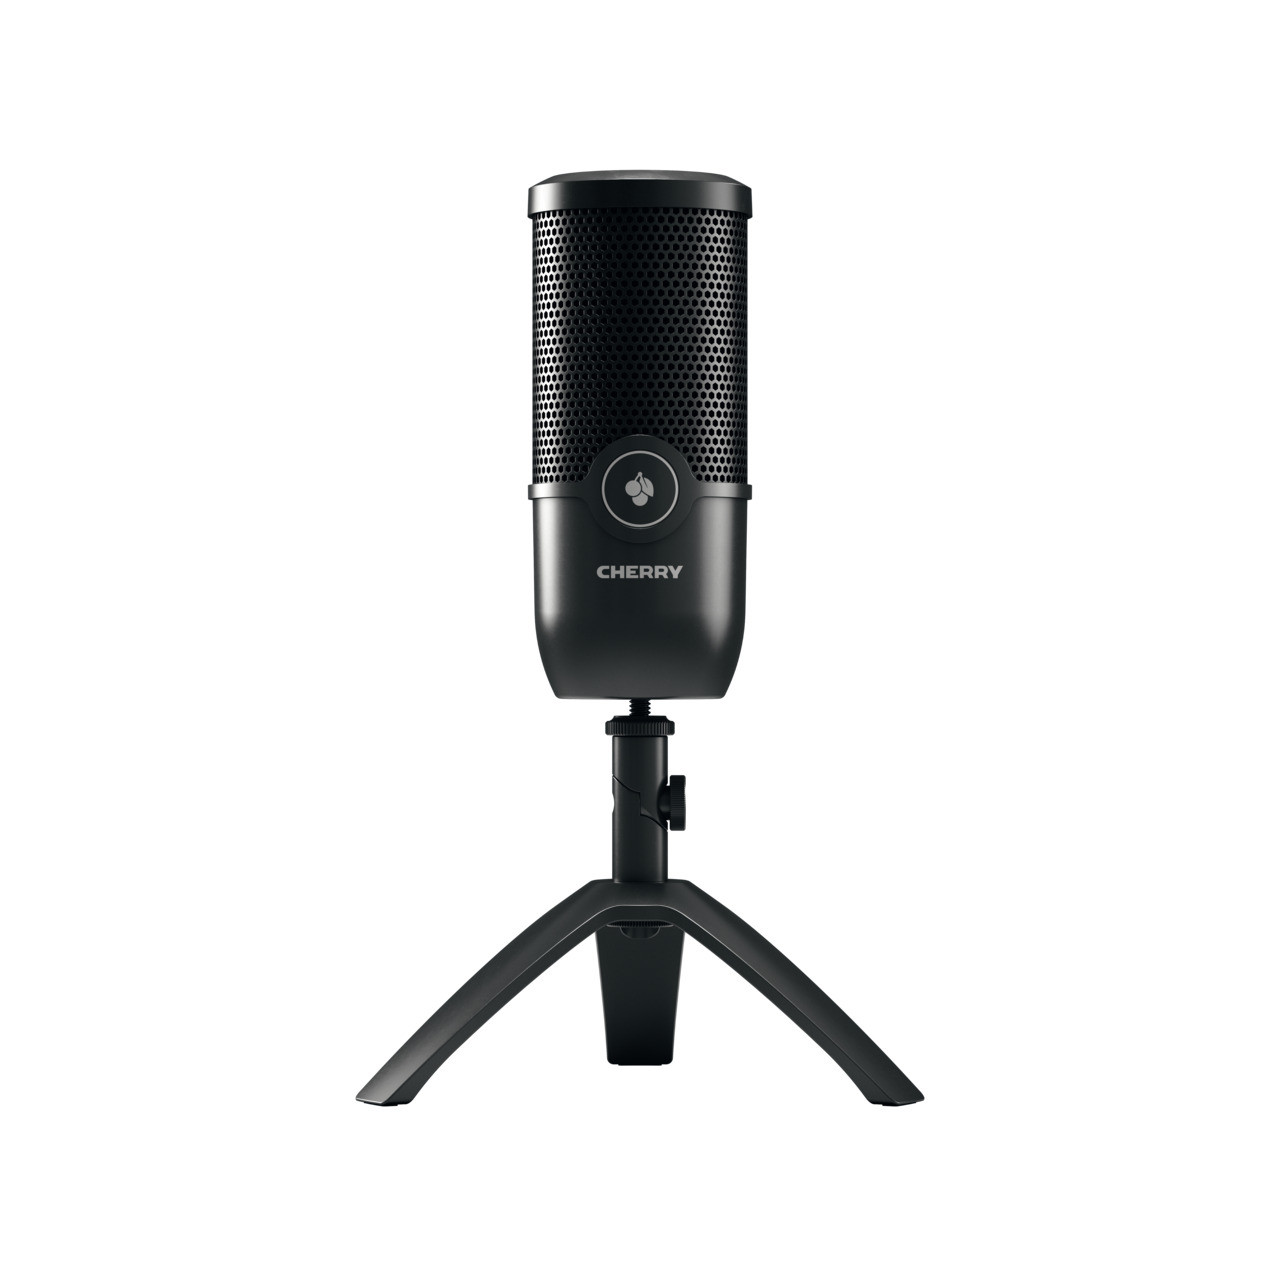 CHERRY UM 3.0 USB MICROPHONE, EQUIPPED WITH A CARDIOID POLAR PATTERN FITTED FOR